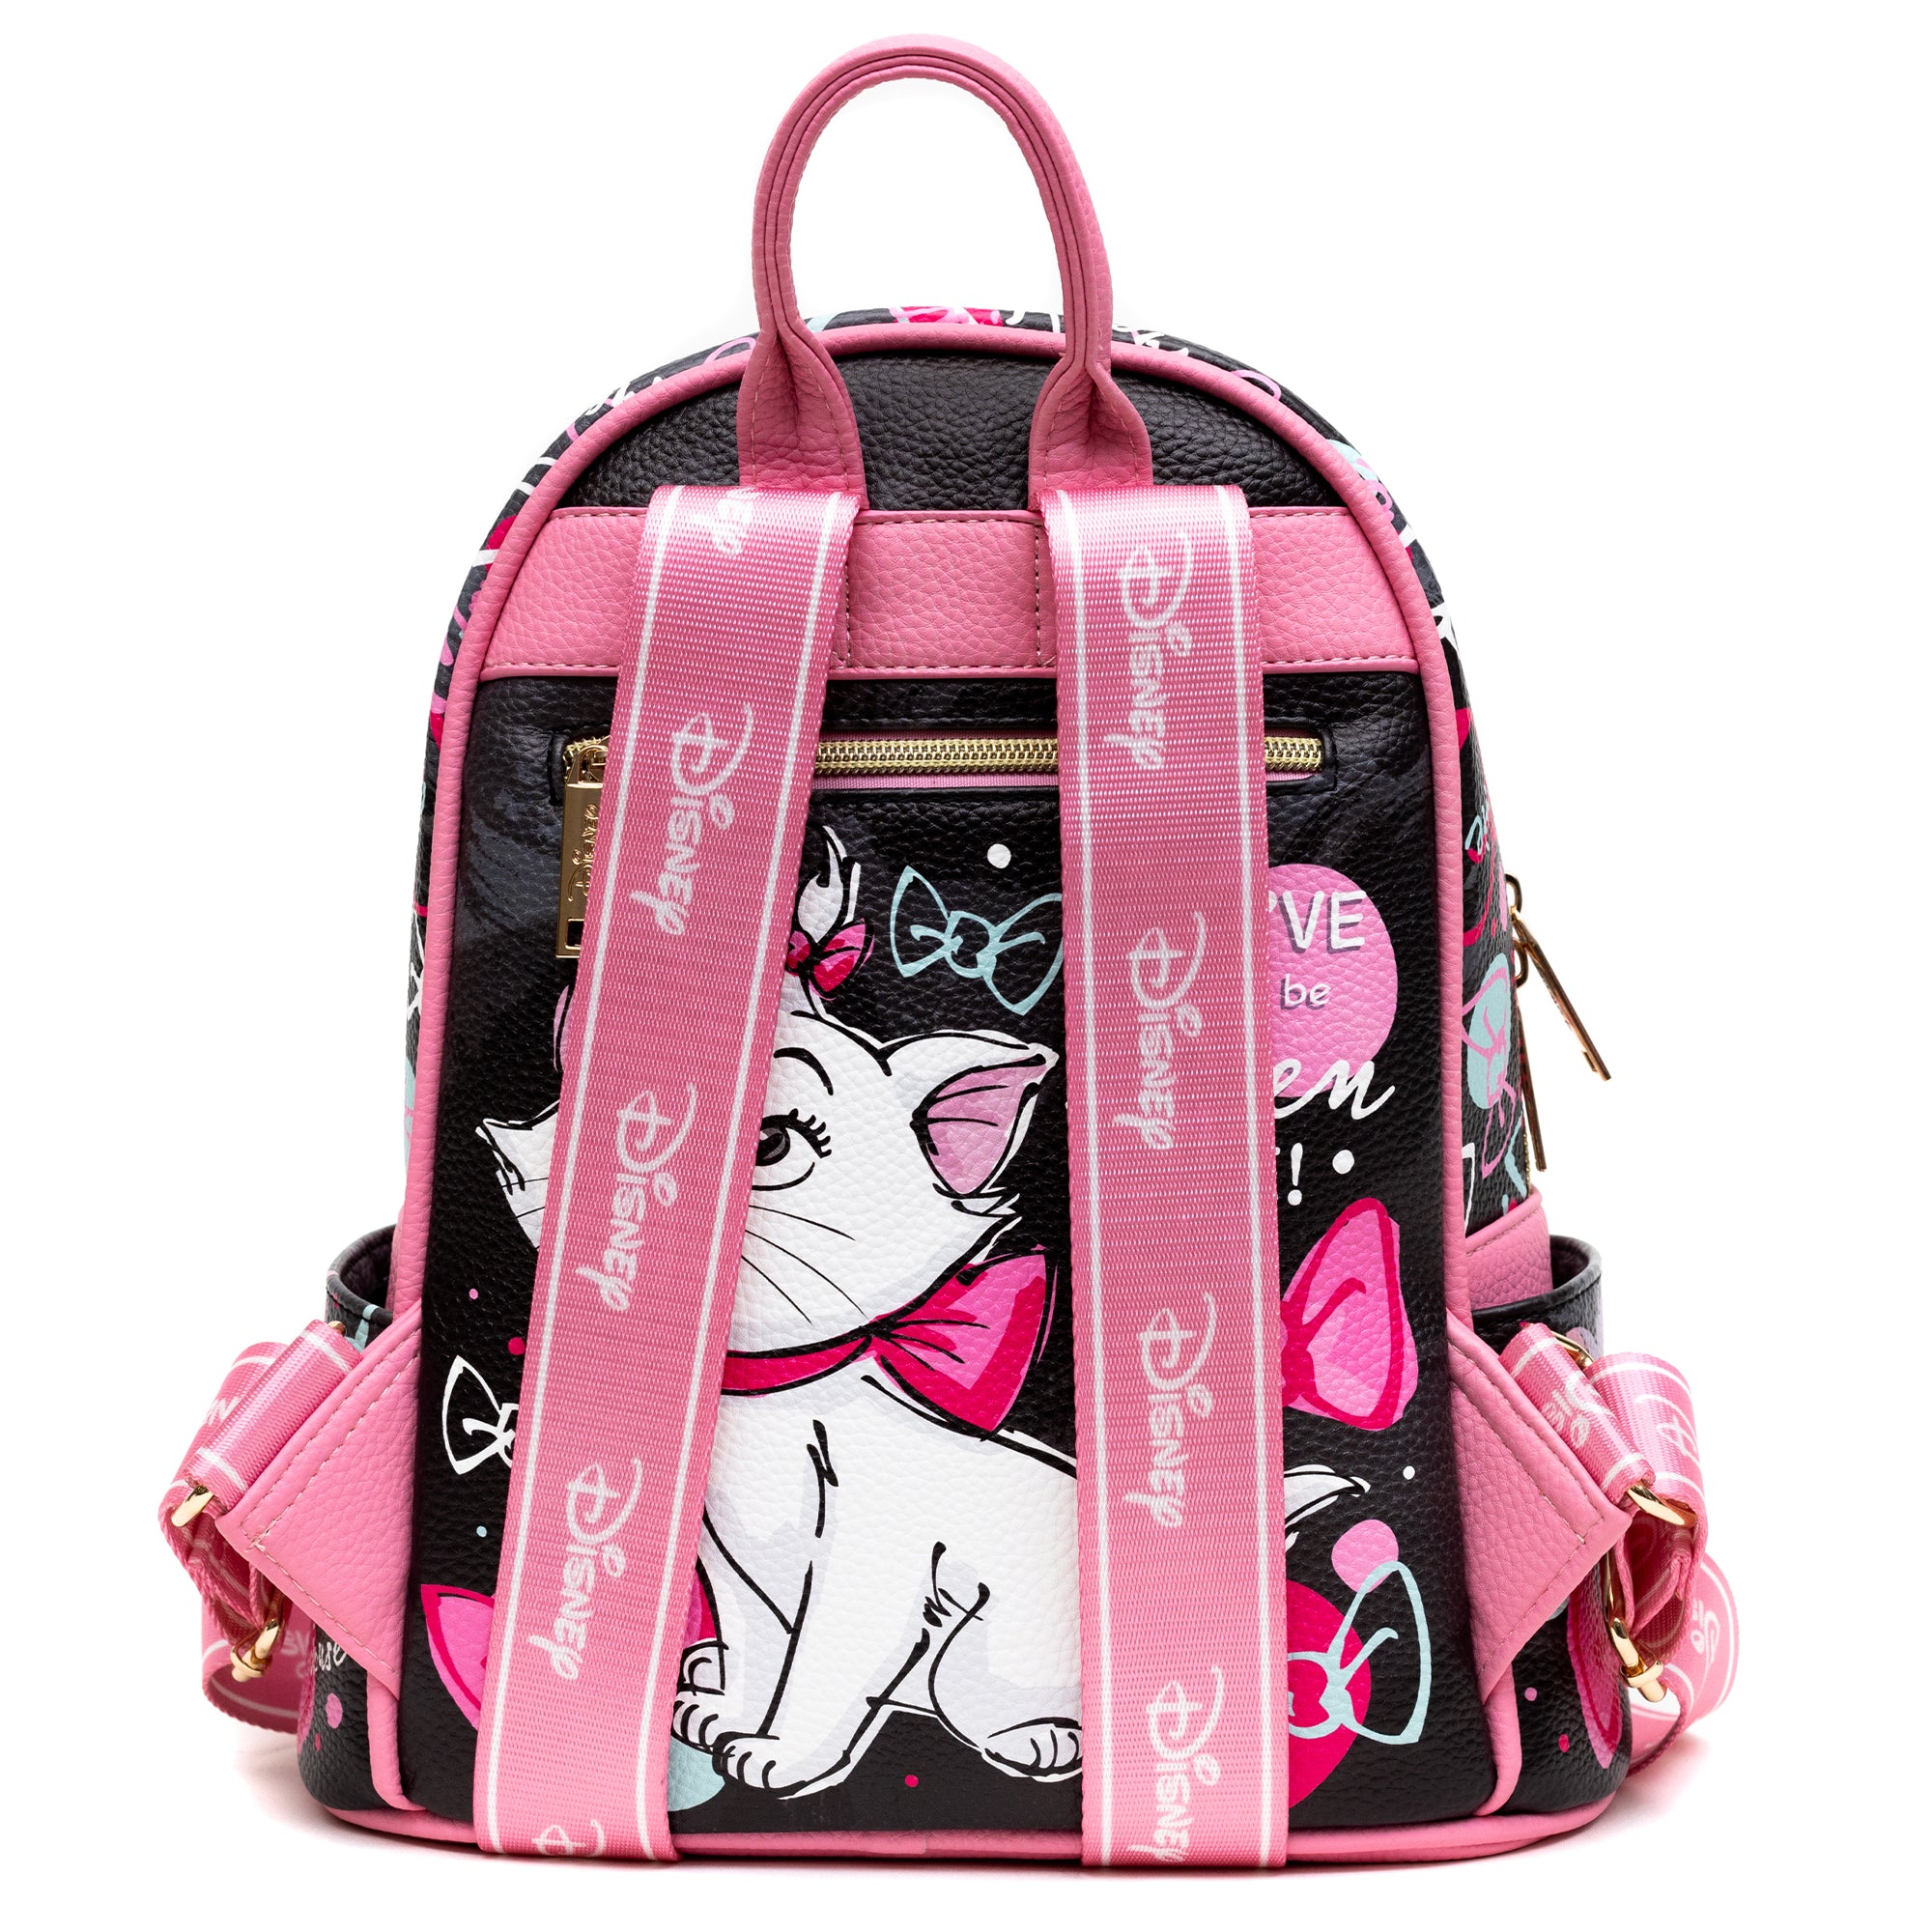 WondaPOP LUXE - Disney The Aristocats Marie Mini Backpack - Limited Edition - NEW RELEASE